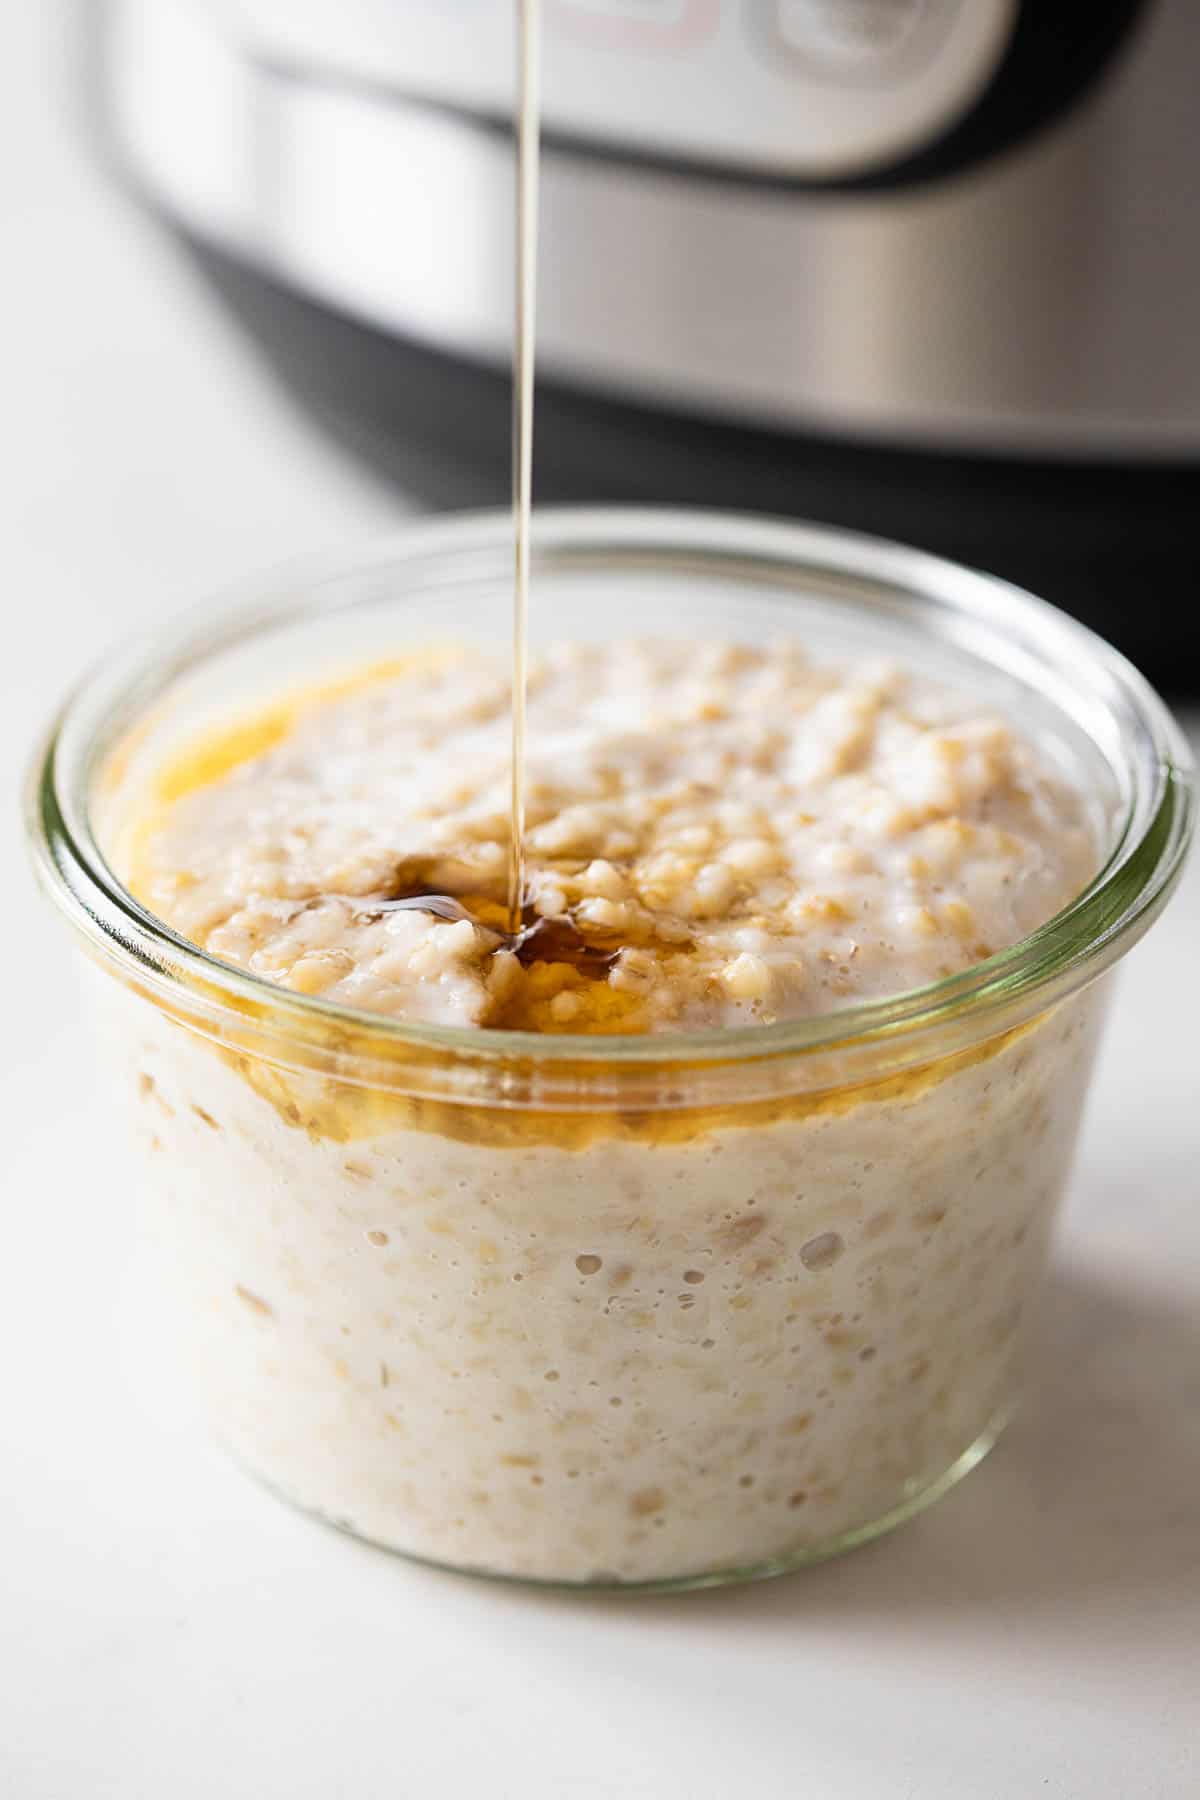 An Instant Pot in the background and cooked steel cut oats in a jar in front.